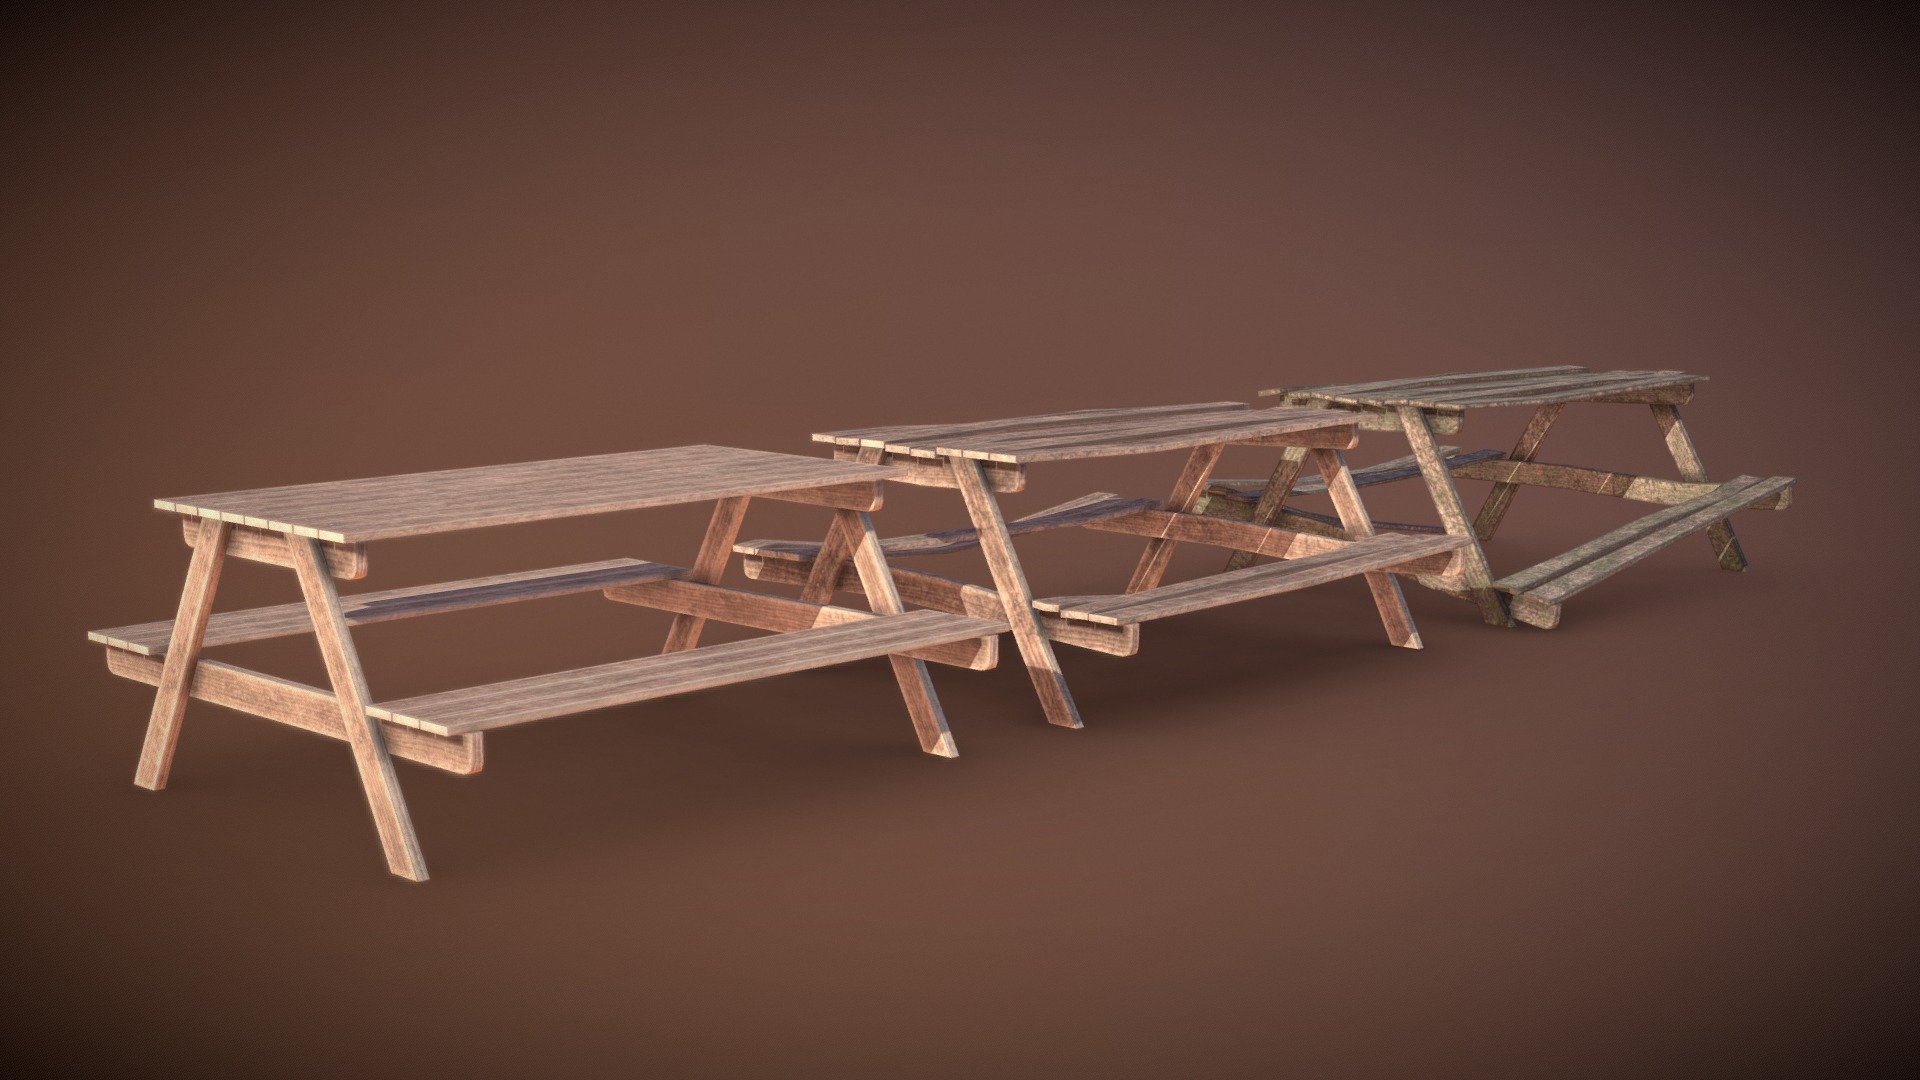 ➥ Game Ready Picnic Table Set for any game project.

➥ 3 Materials (Table_MAT, OTable_MAT and DTable_MAT with x4096 textures)

➥ Unity Prefab model with materials included (Unity 5 Autodesk Interactive shader):

Preview Unity Package

IMPORTANT!!! Exported with Unity 2019.3.15f1

➥ Additional .zip that includes:




Blender Editable File (Included Low Poly Unwrapped with textures and HighPoly Original mesh without textures, used for bakes).




Textures




Unity Package (Model, Material, Textures and Prefab)




Original Low Poly FBX




Thank you message :)



➥ Some Extra Screenshots:
Preview Blender Editable - Picnic Table Set - Buy Royalty Free 3D model by Agustín Hönnun (@Agustin_Honnun) 3d model